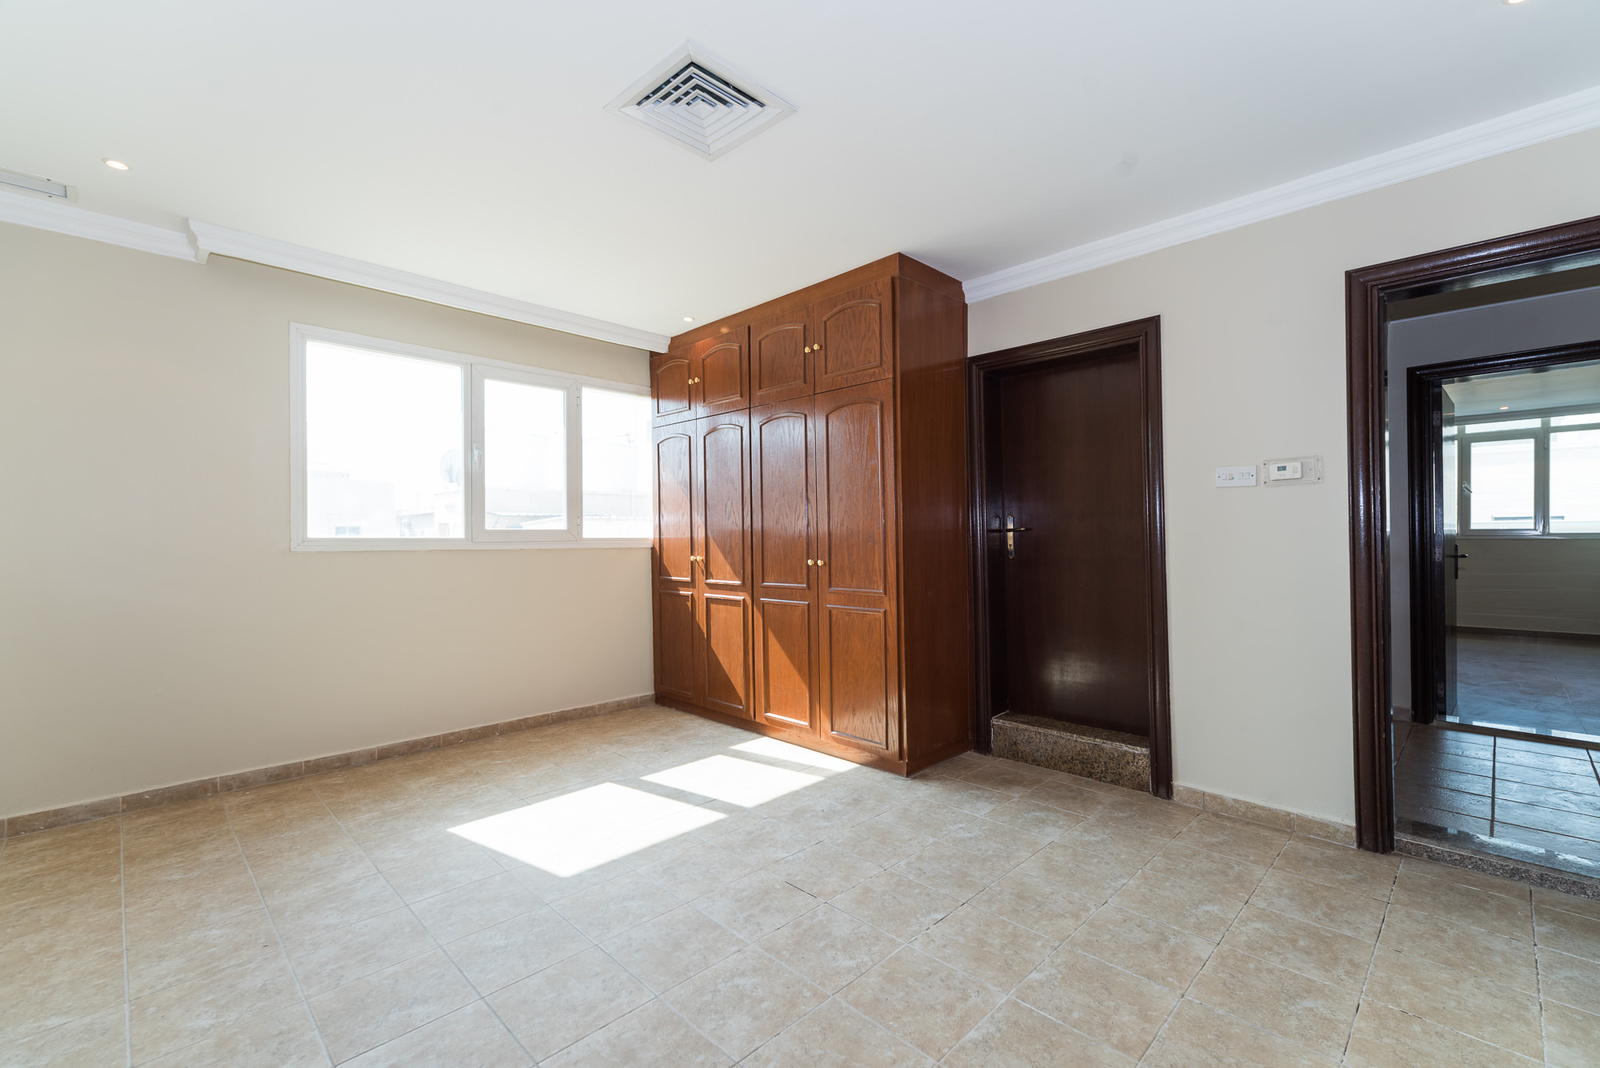 Salwa – unfurnished, spacious, two bedroom apartment